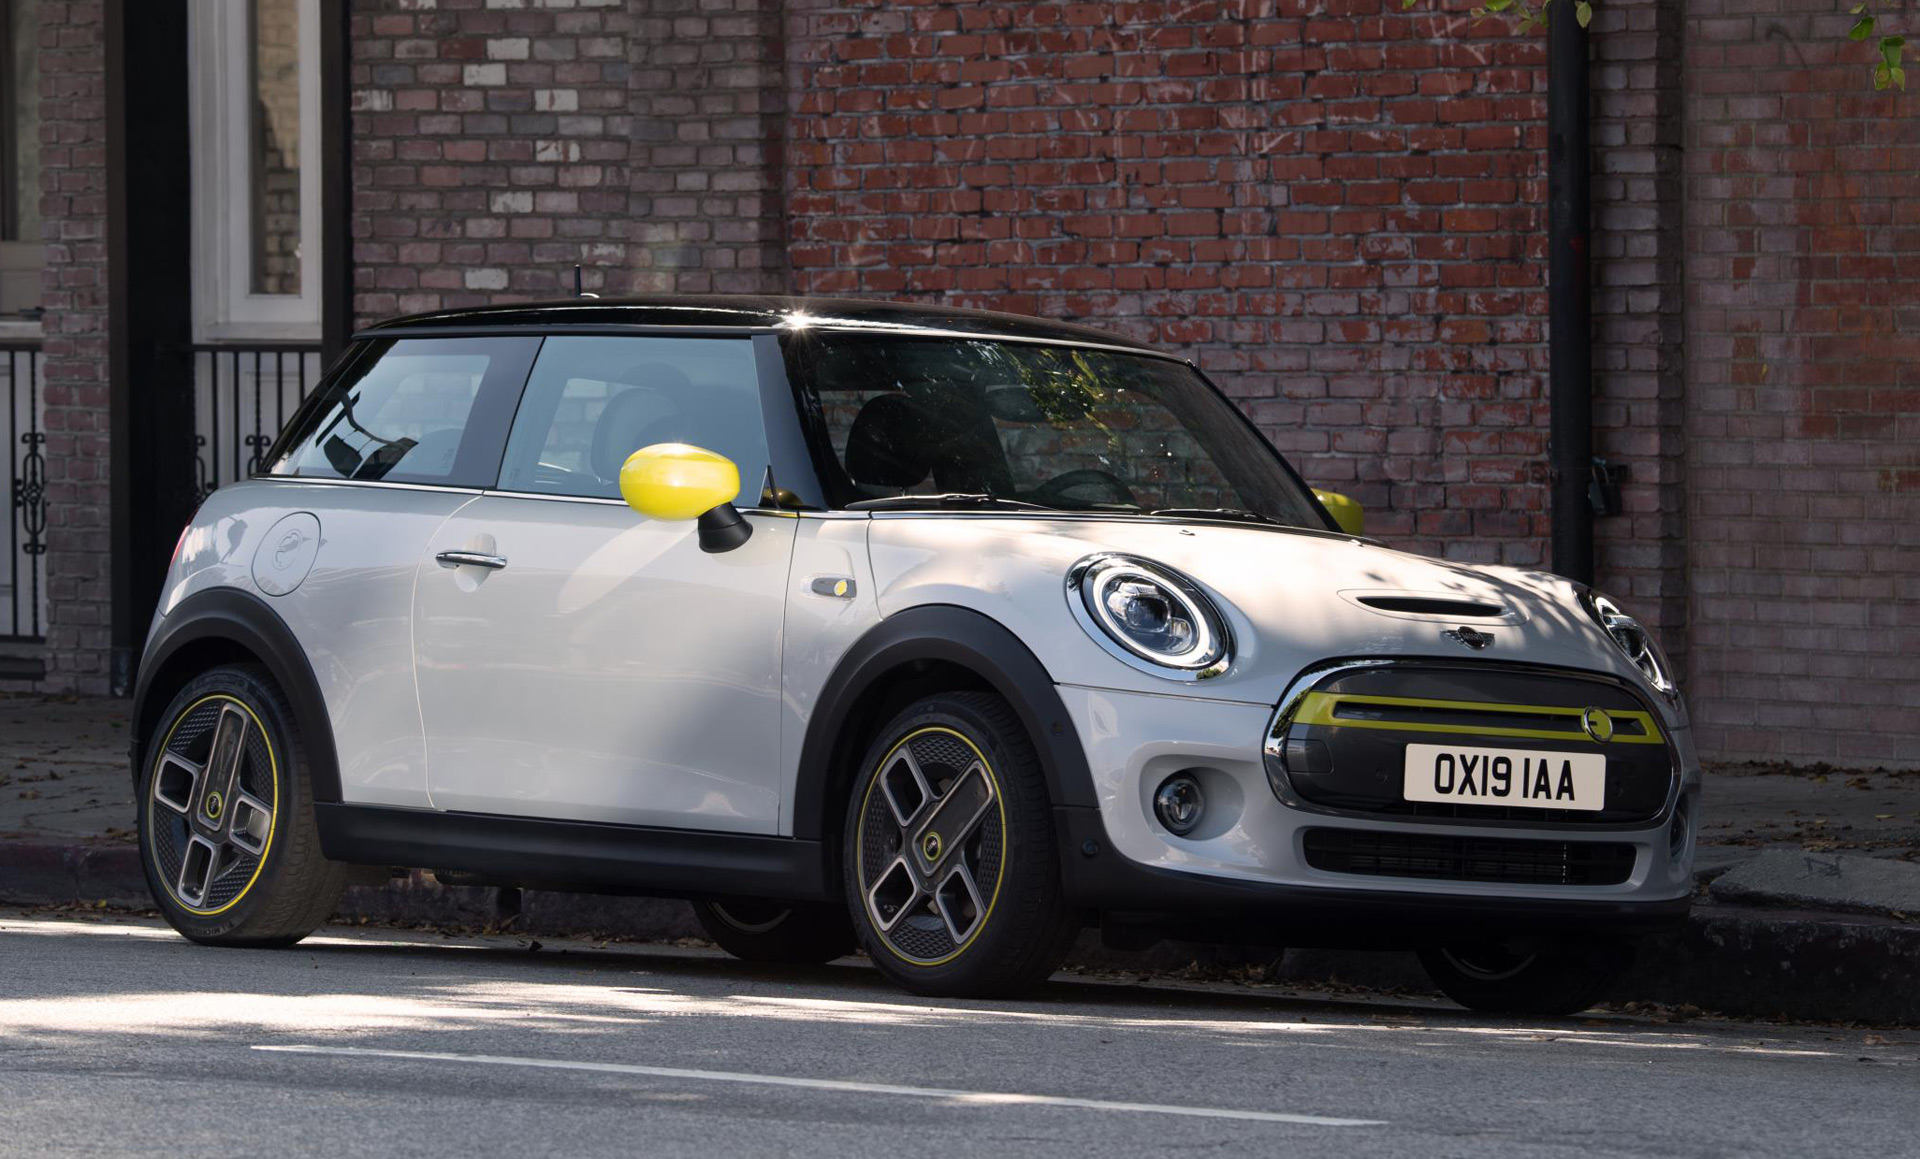 Mini Cooper Se Electric Car Could Sell Below 19k After Incentives